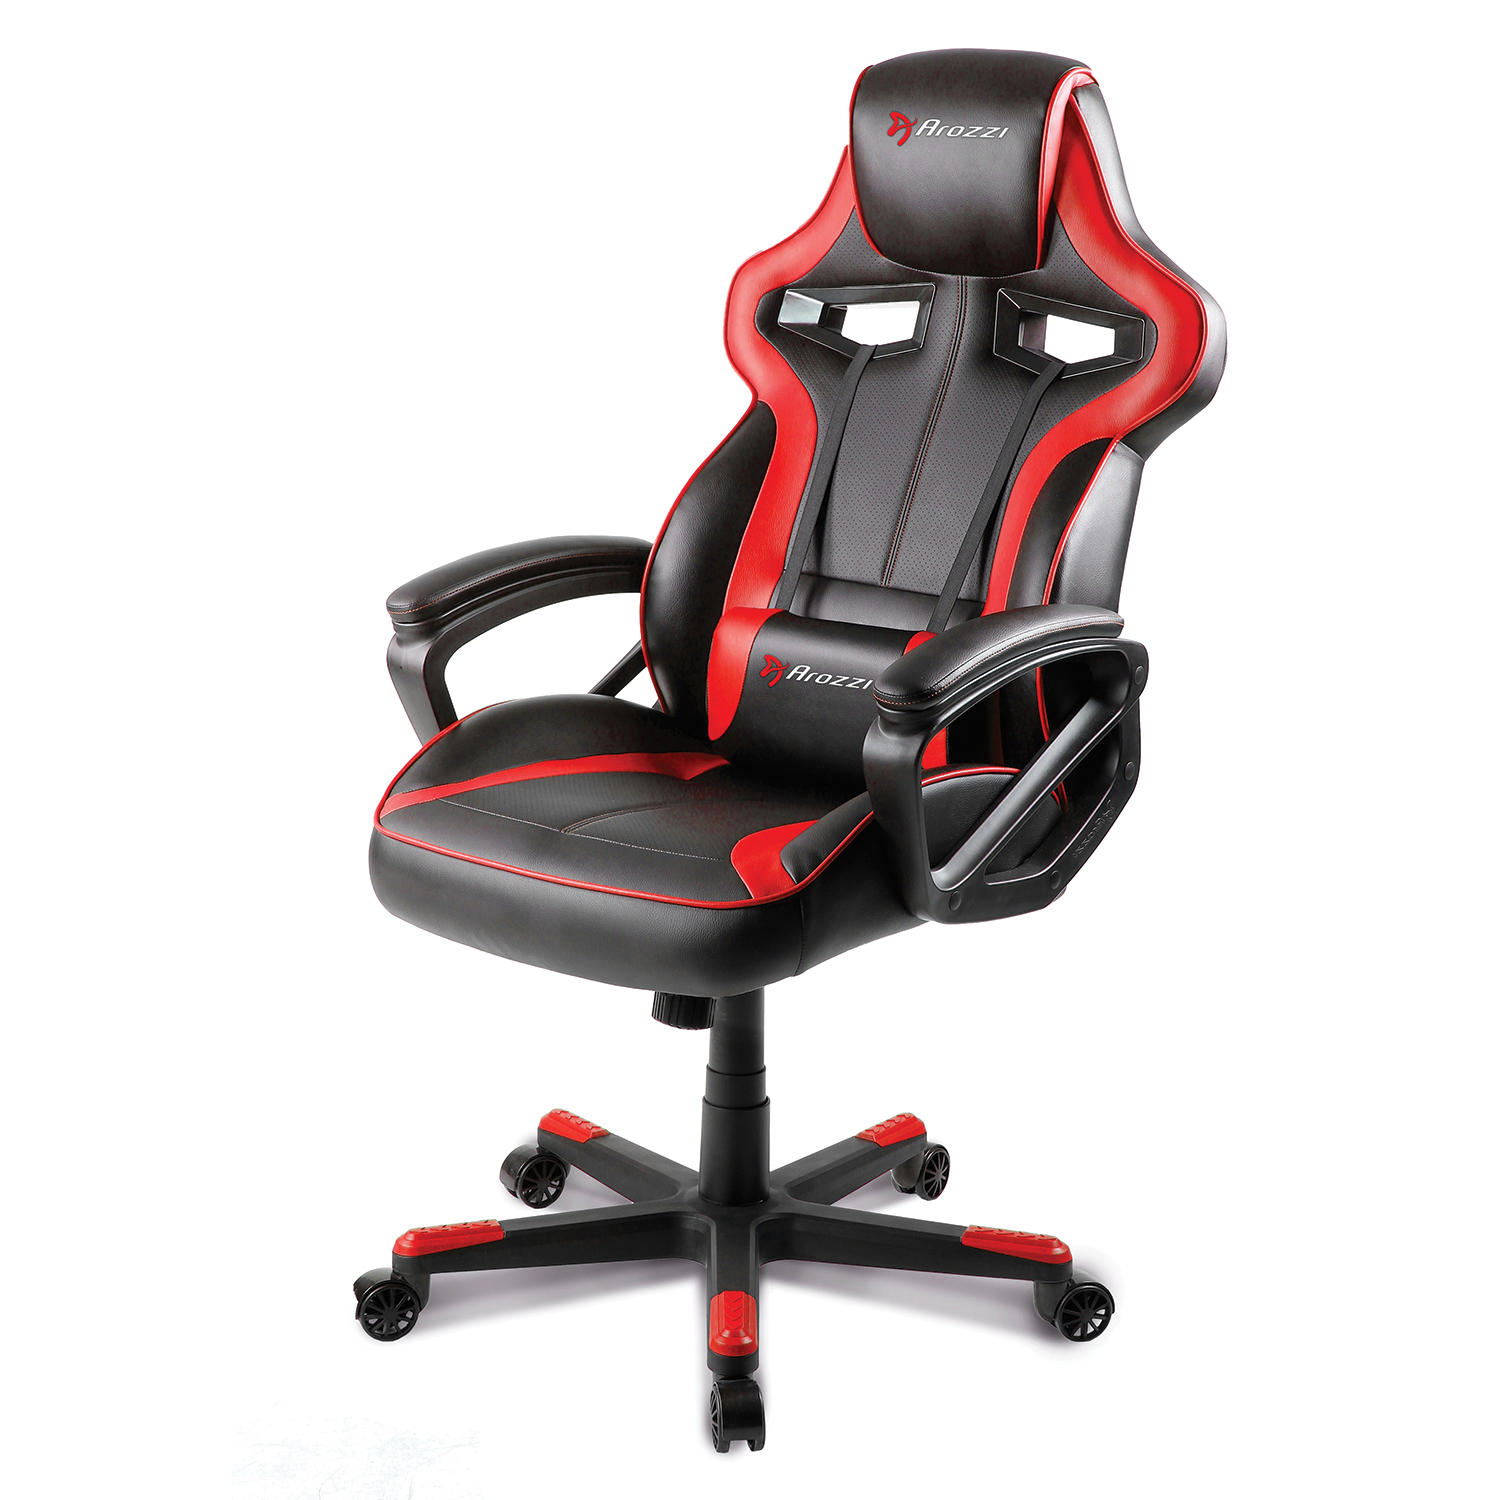 Save  on Enhanced Gaming Chair (Assorted Colors)